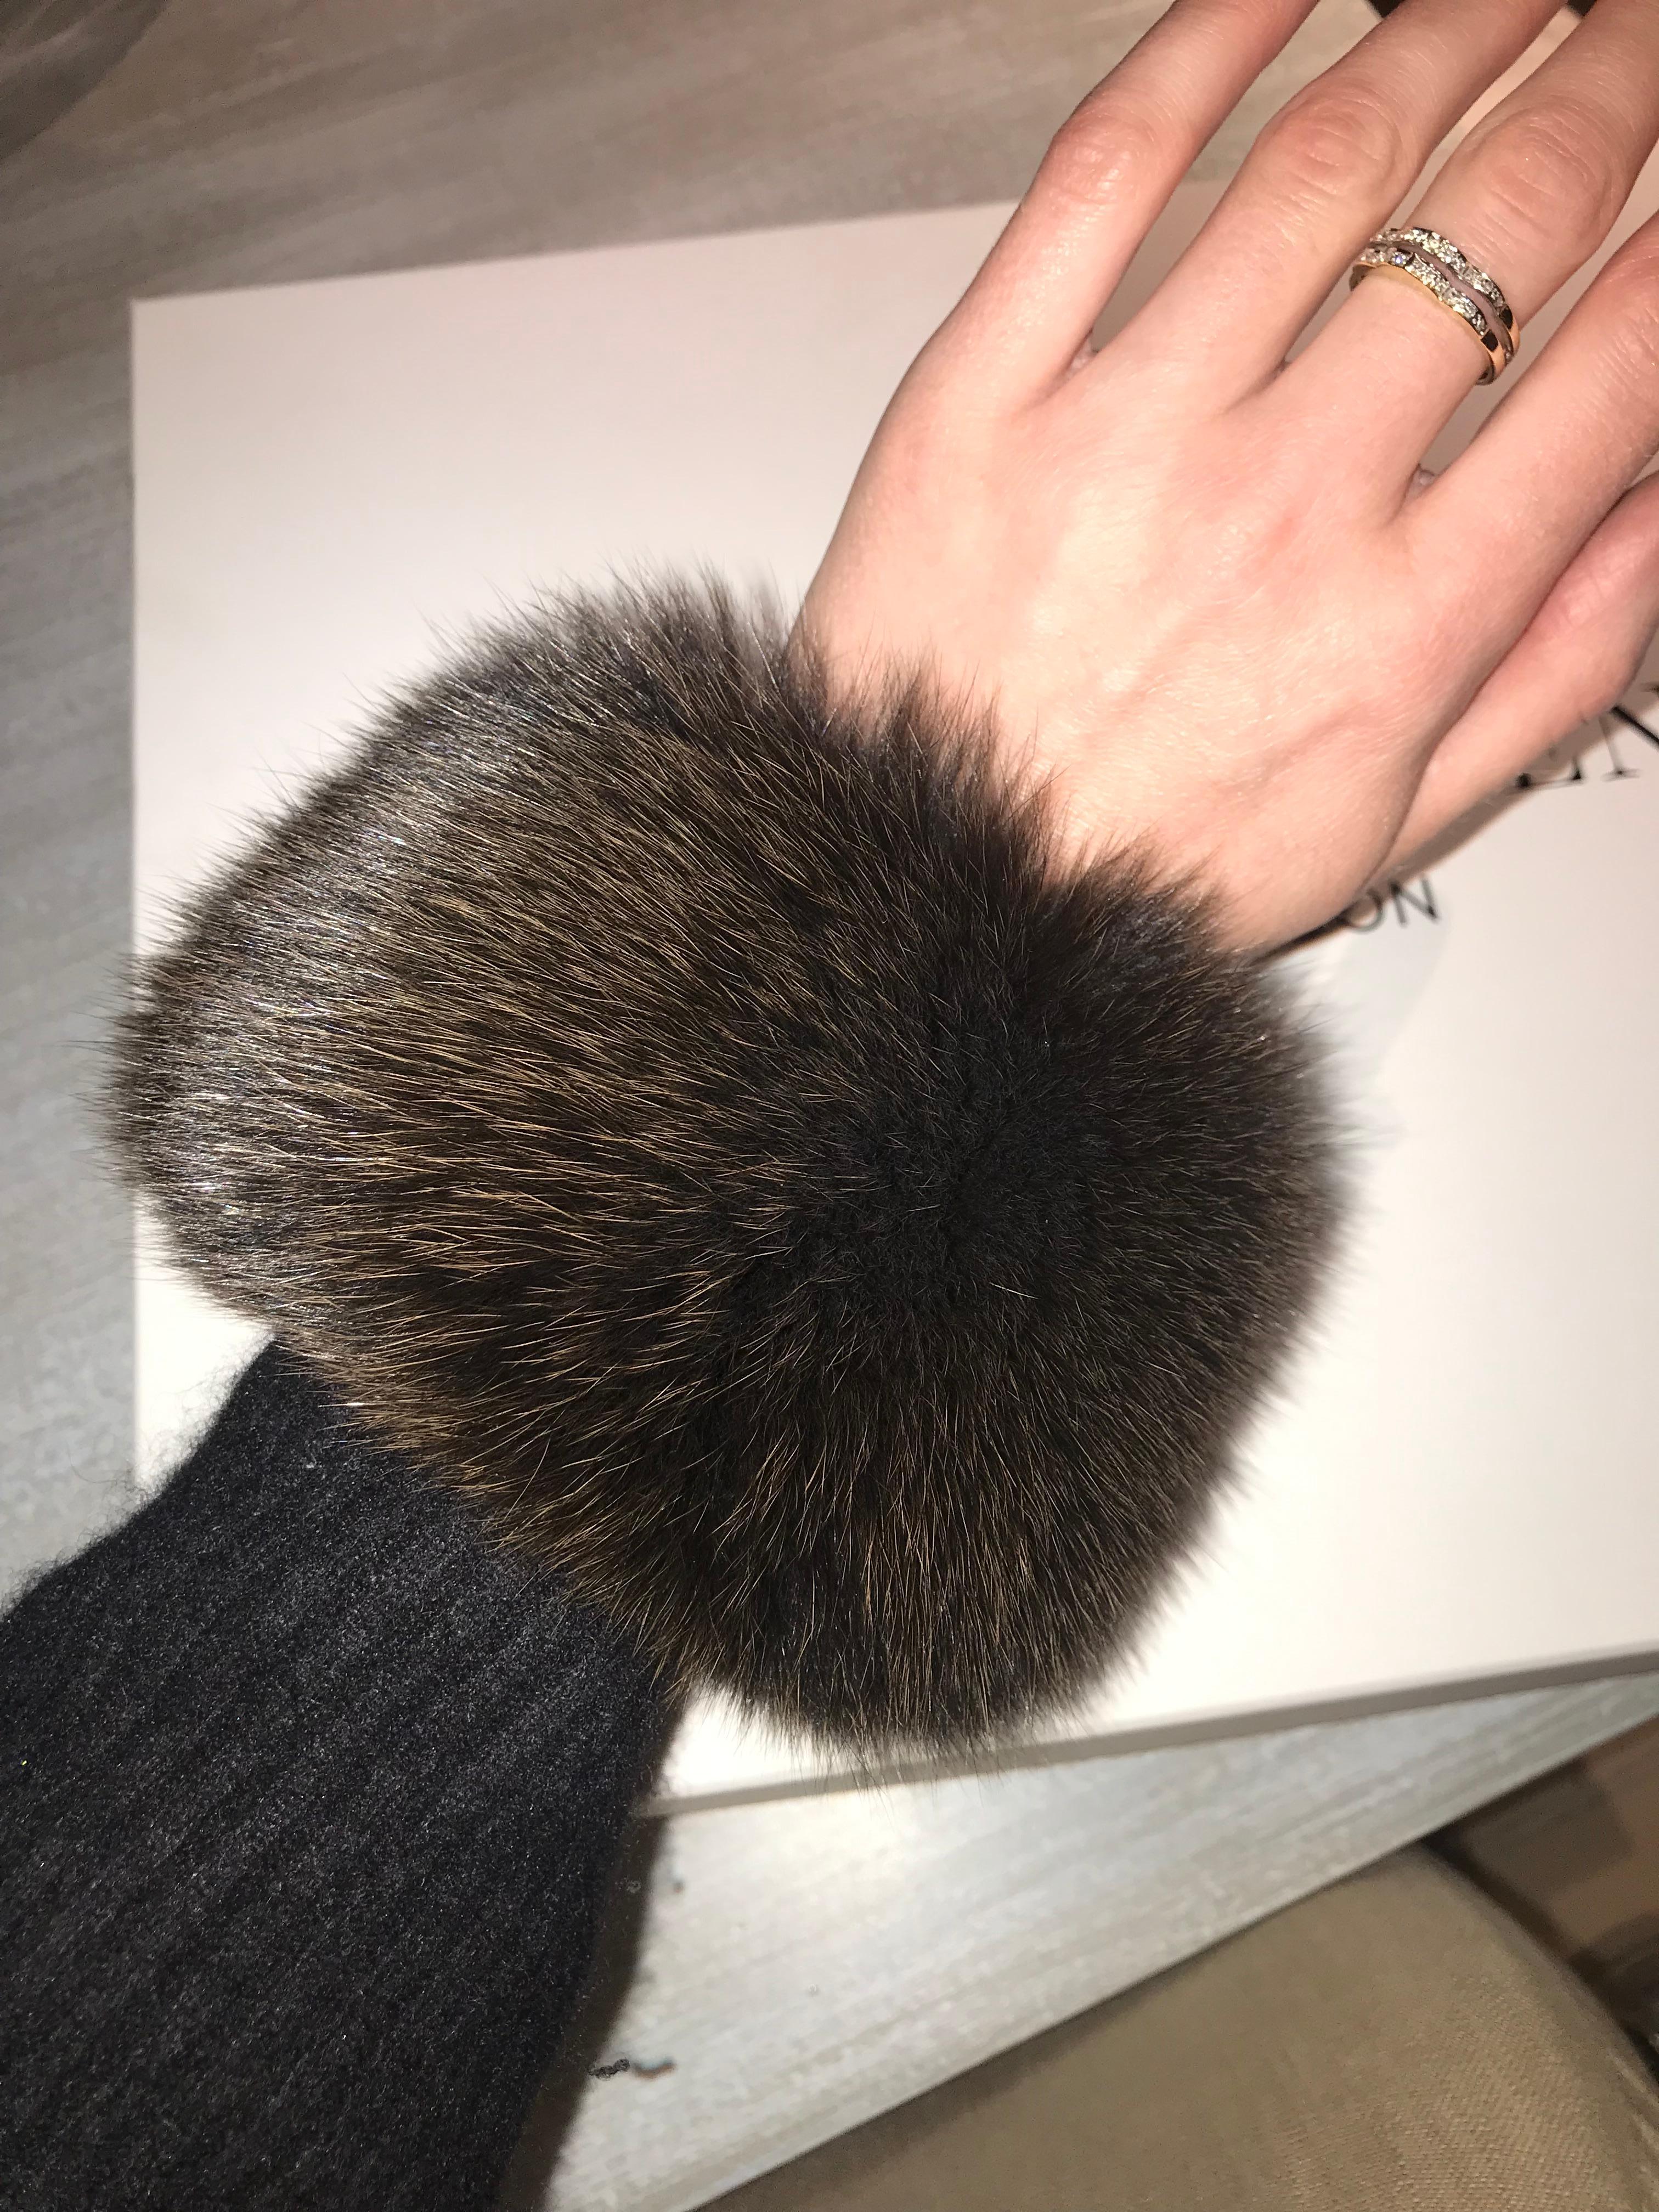 Verheyen London Snap on Fox Cuffs are the perfect accessory for winter/autumn dressing. Wear over any jumper or coat, these cuffs will jazz up any look and keep you staying cosy with style. 

All fur is origin assured and ethically sourced from